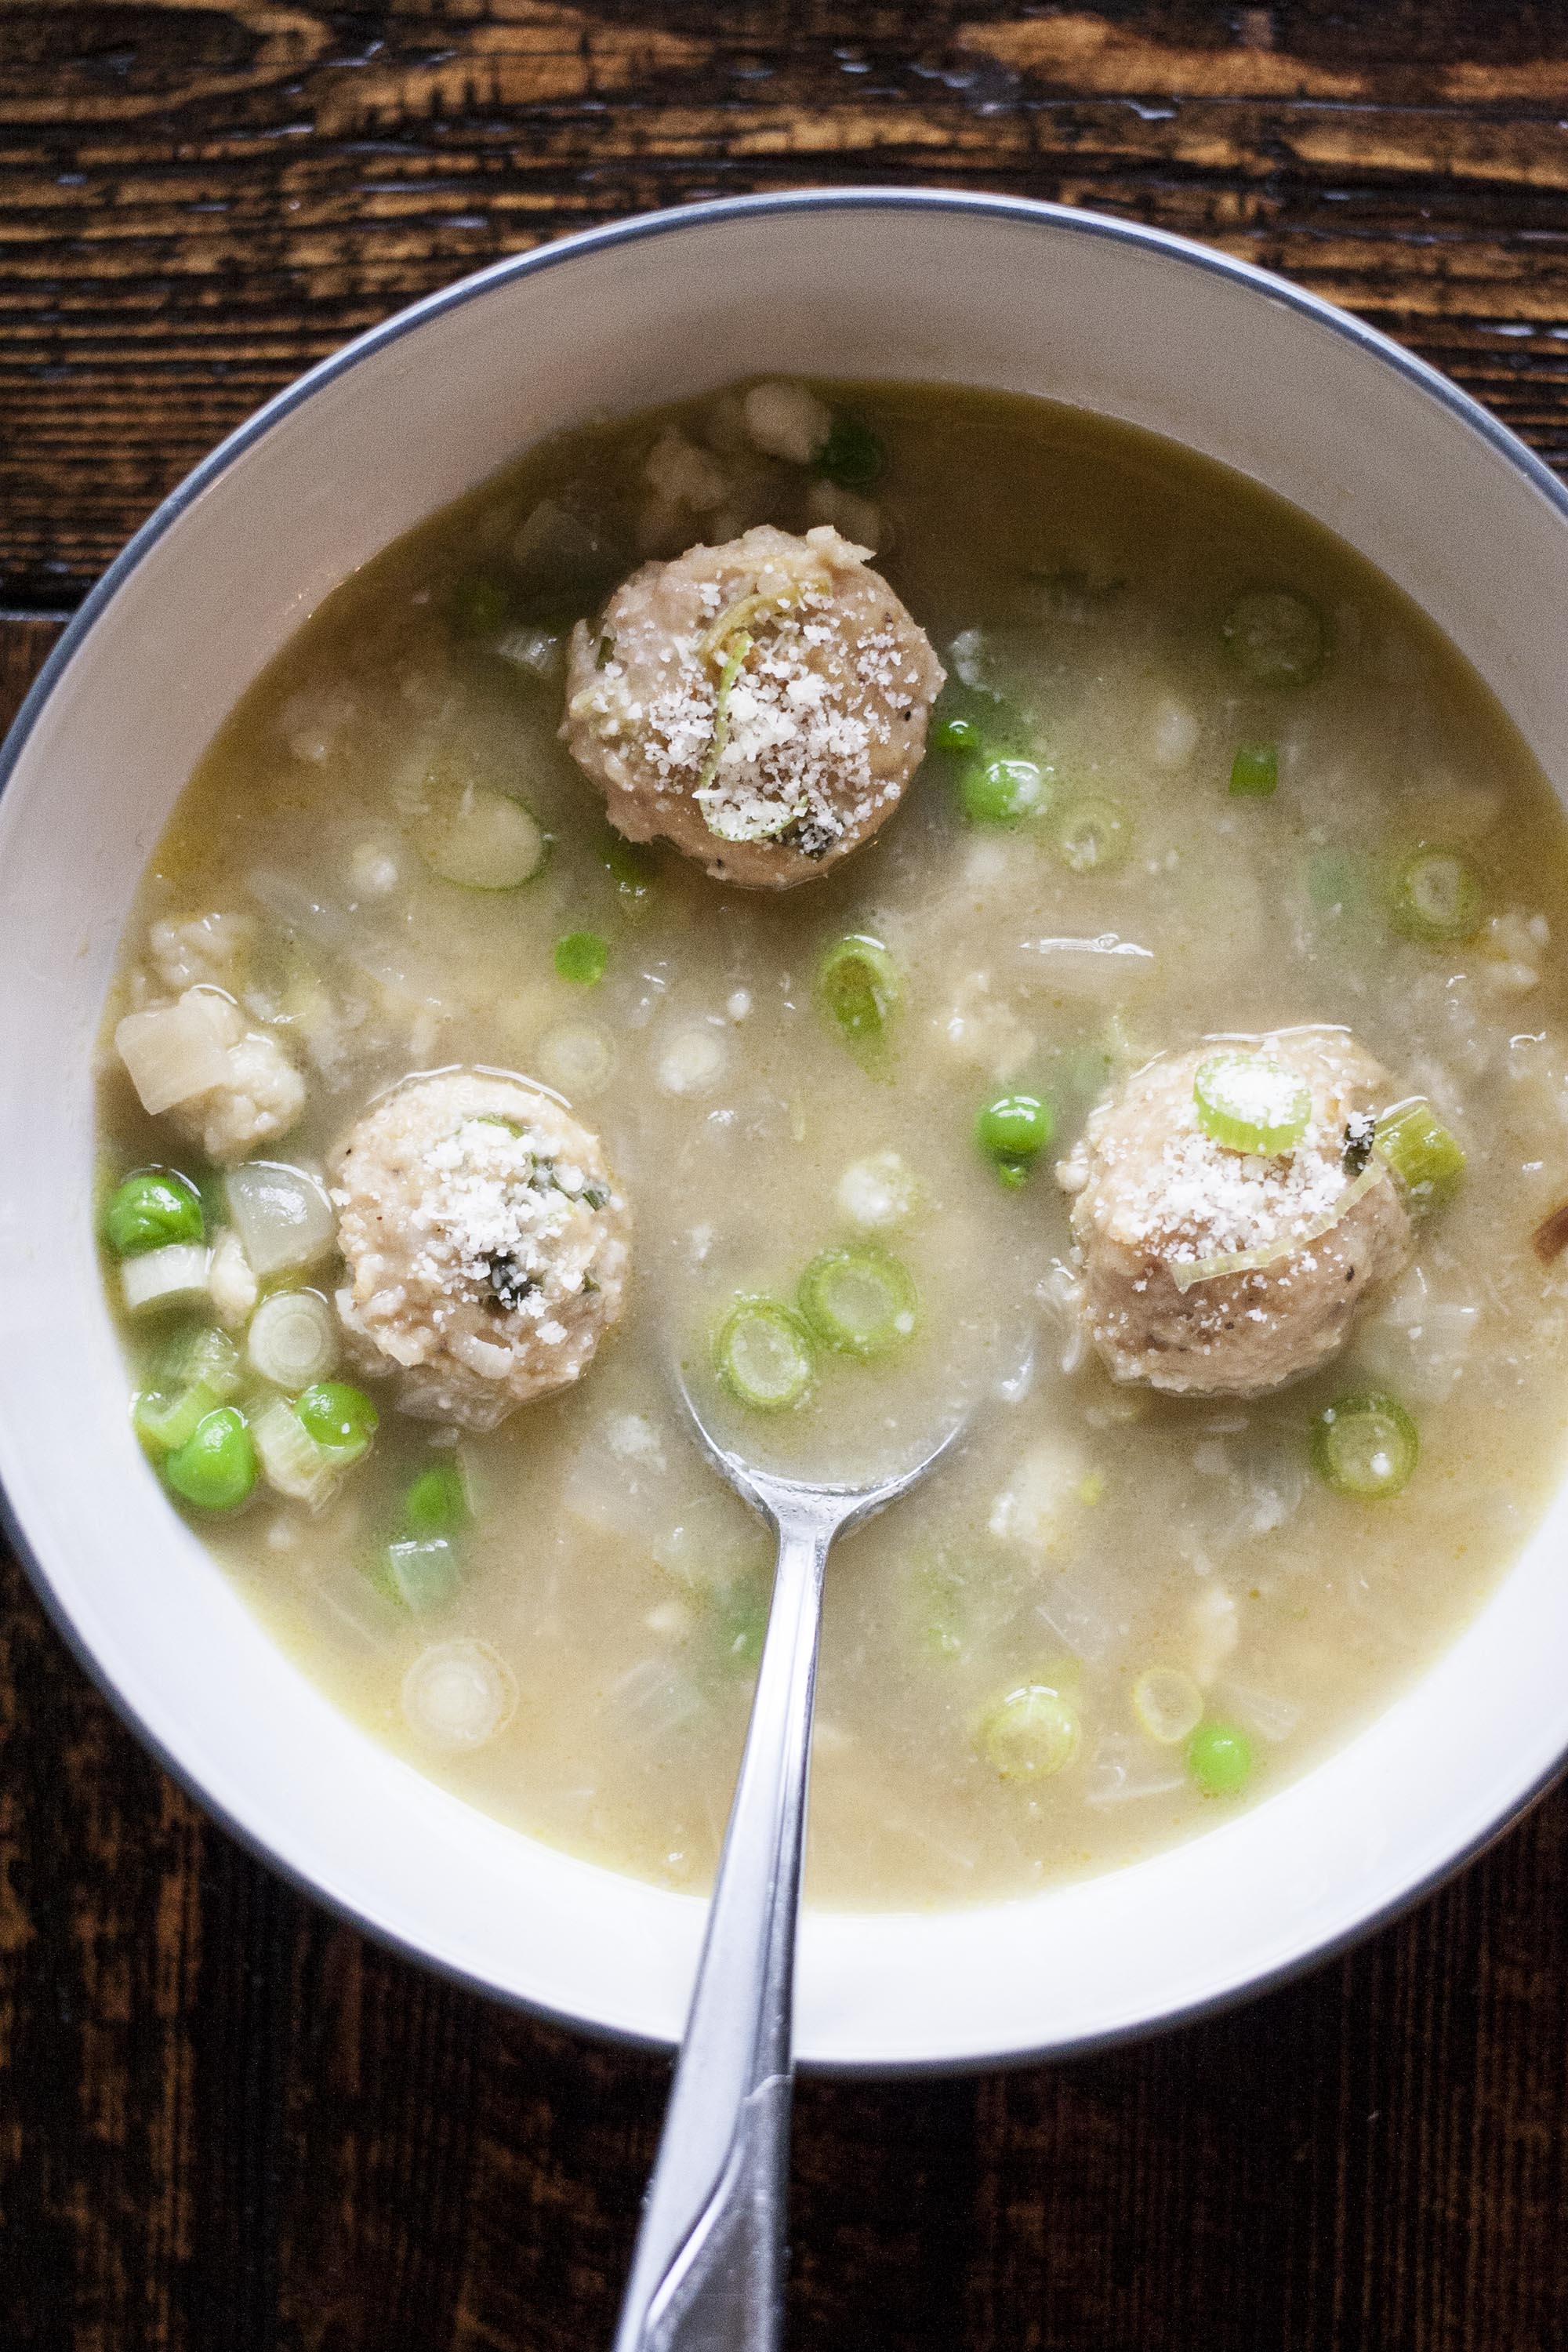 Grated Pasta, Lemon Chicken-Meatballs and Peas in Broth: Hand-grated, meatballs and peas to make the perfect, not too heavy, winter soup. lifeaswecookit.com